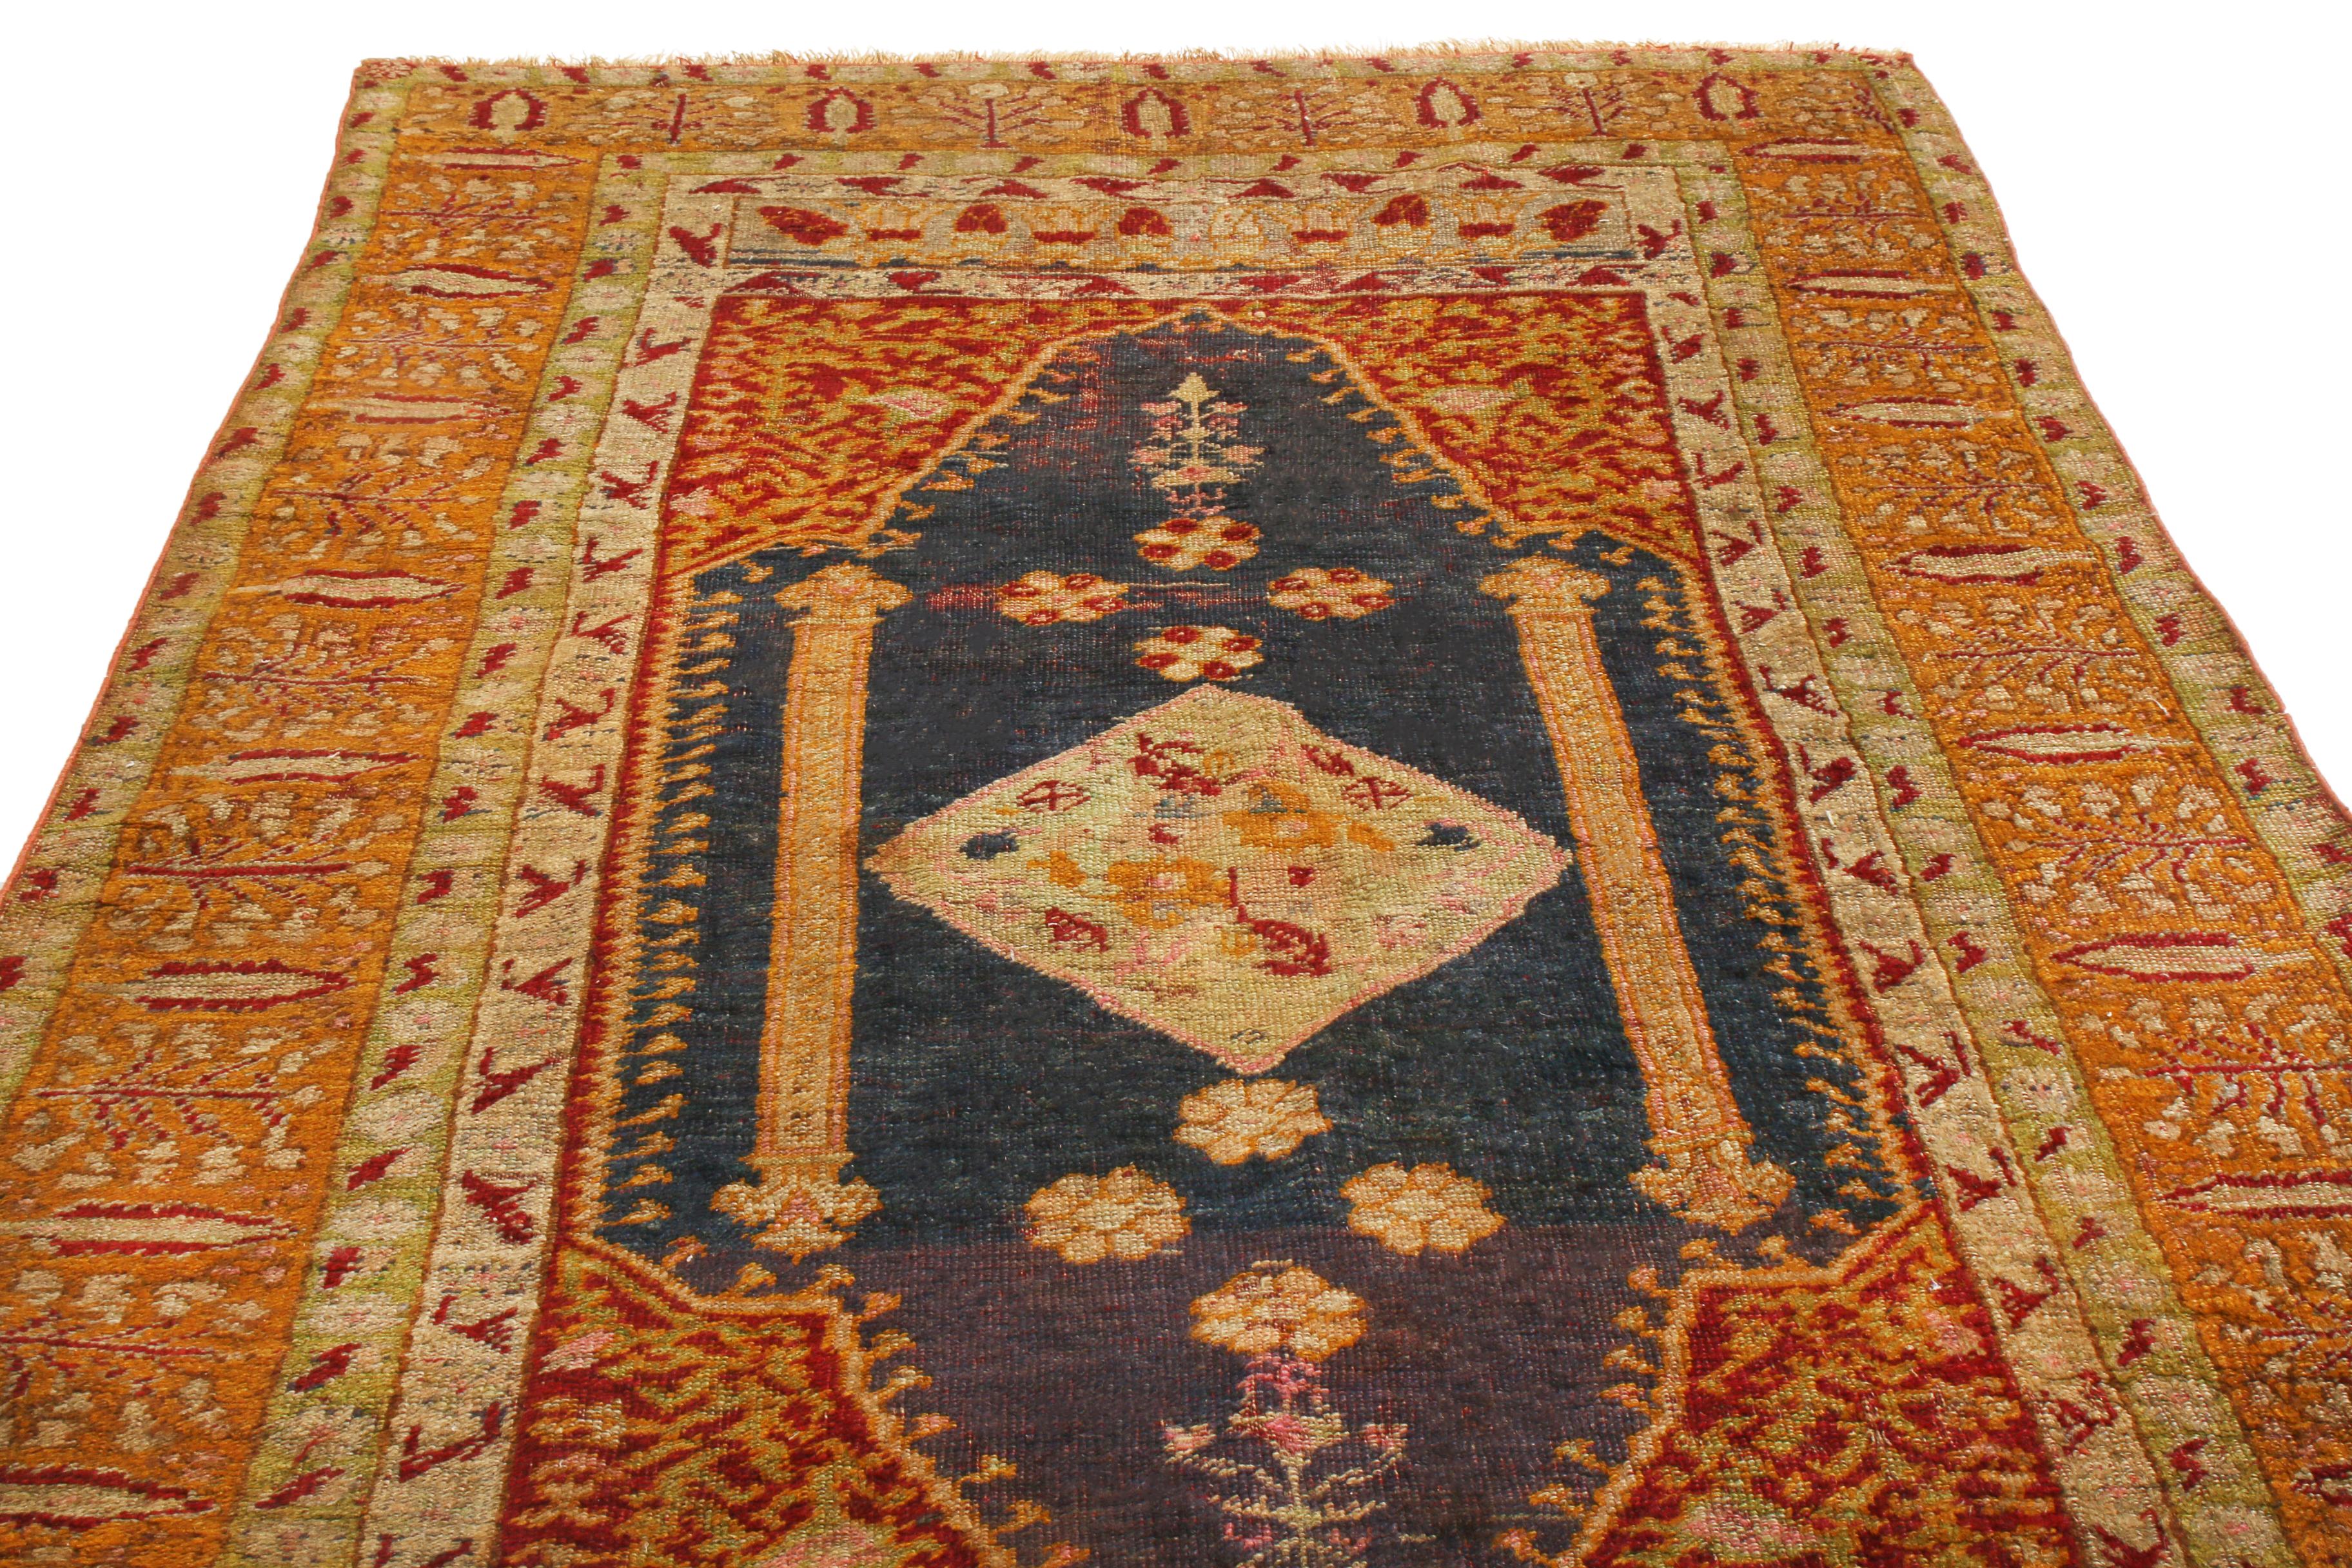 Originating from Turkey between 1890-1910, this antique traditional Oushak wool rug features a variation of notable tree of life symbols in its outer field and borders. Hand knotted in high quality wool, the central royal blue medallion bears